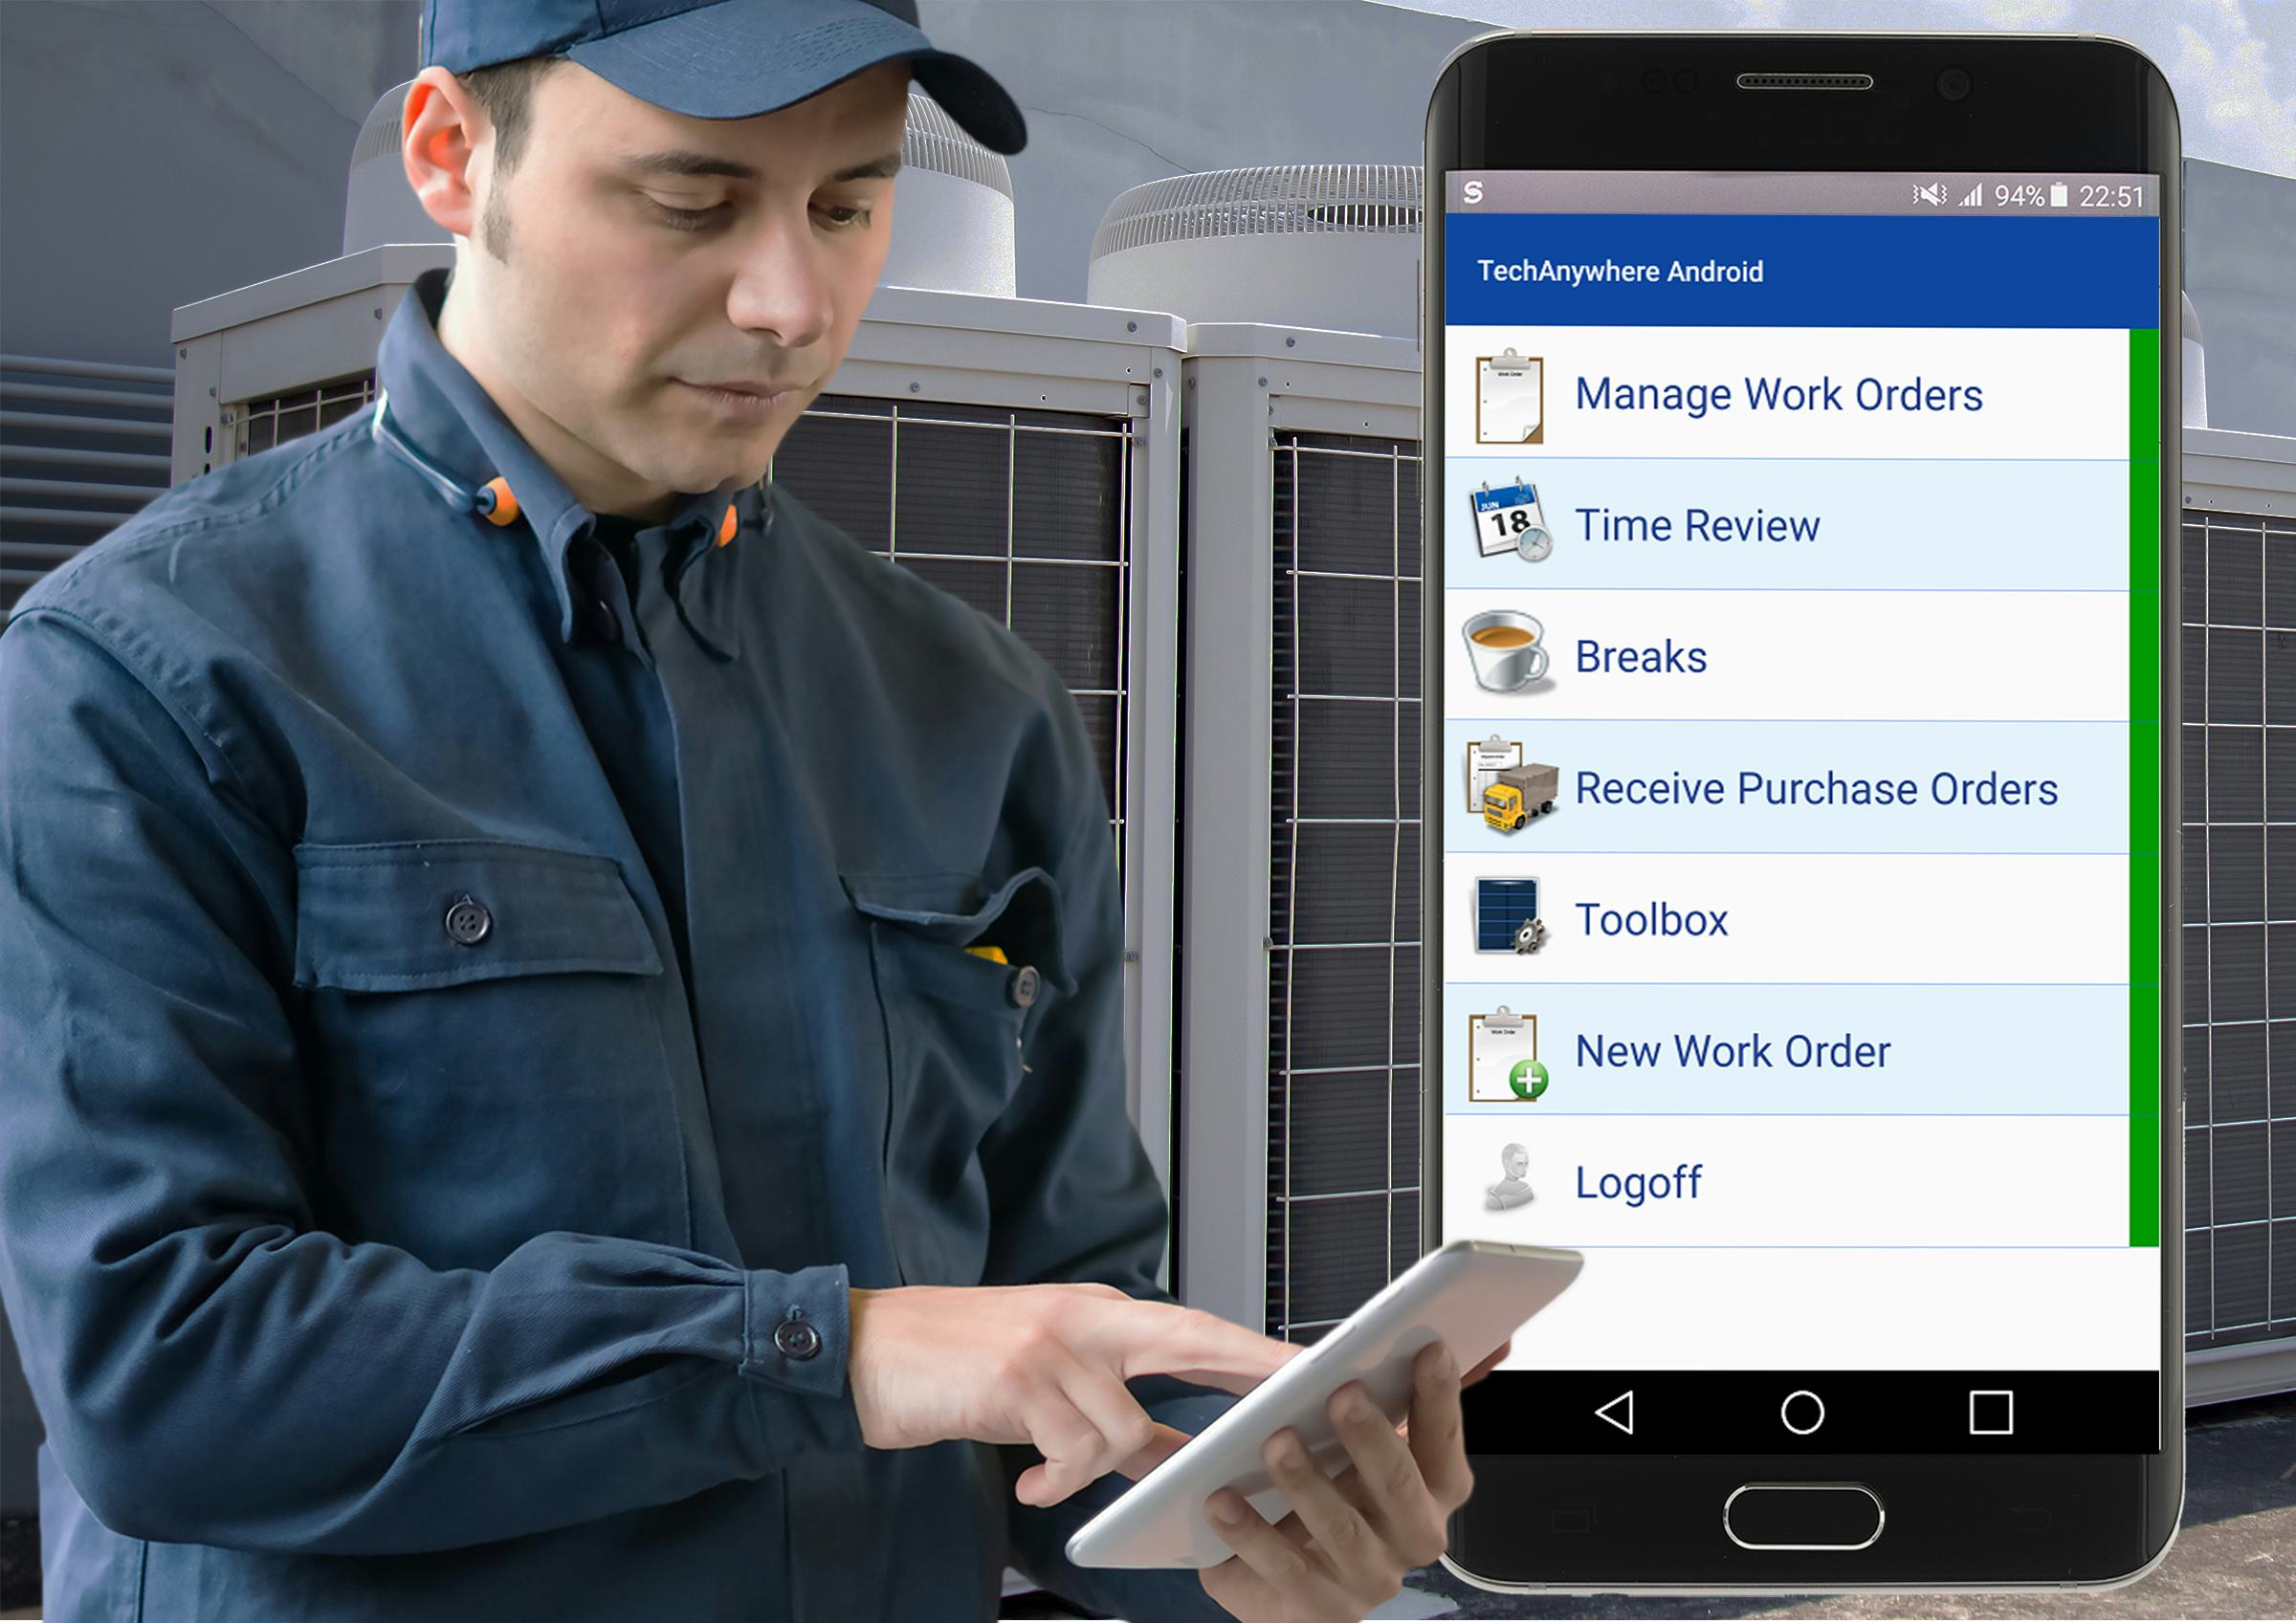 SAMPro Enterprise Software - Utilizing secure, password-protected connectivity, mobile technician software lets your technicians easily capture vital client information, report activity, update work orders and much more through any Android wireless device.